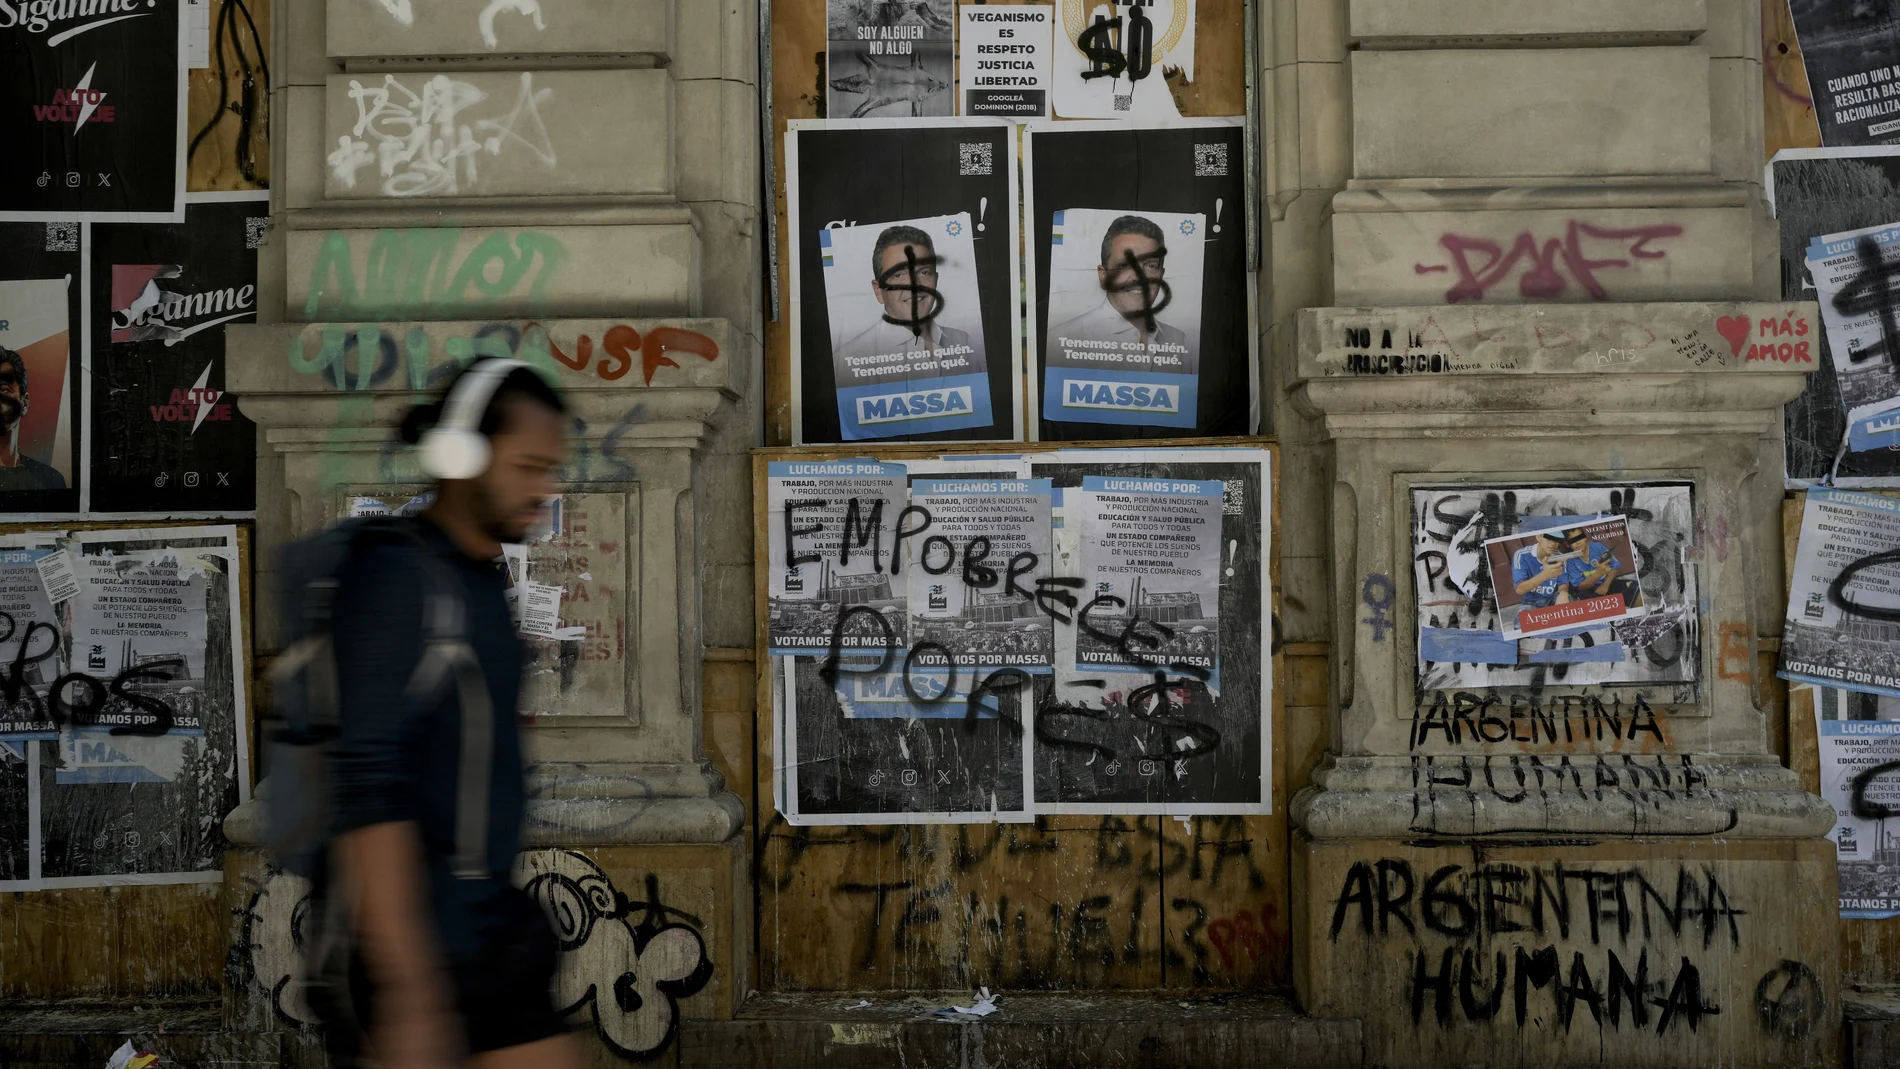 A man walks near a posters of Sergio Massa, Argentine Economy Minister and presidential candidate for the ruling party, in Buenos Aires, Argentina, Saturday, Nov. 18, 2023. Massa will face Liberty Advances coalition candidate Javier Milei in a runoff election on Nov. 19. (AP Photo/Rodrigo Abd)